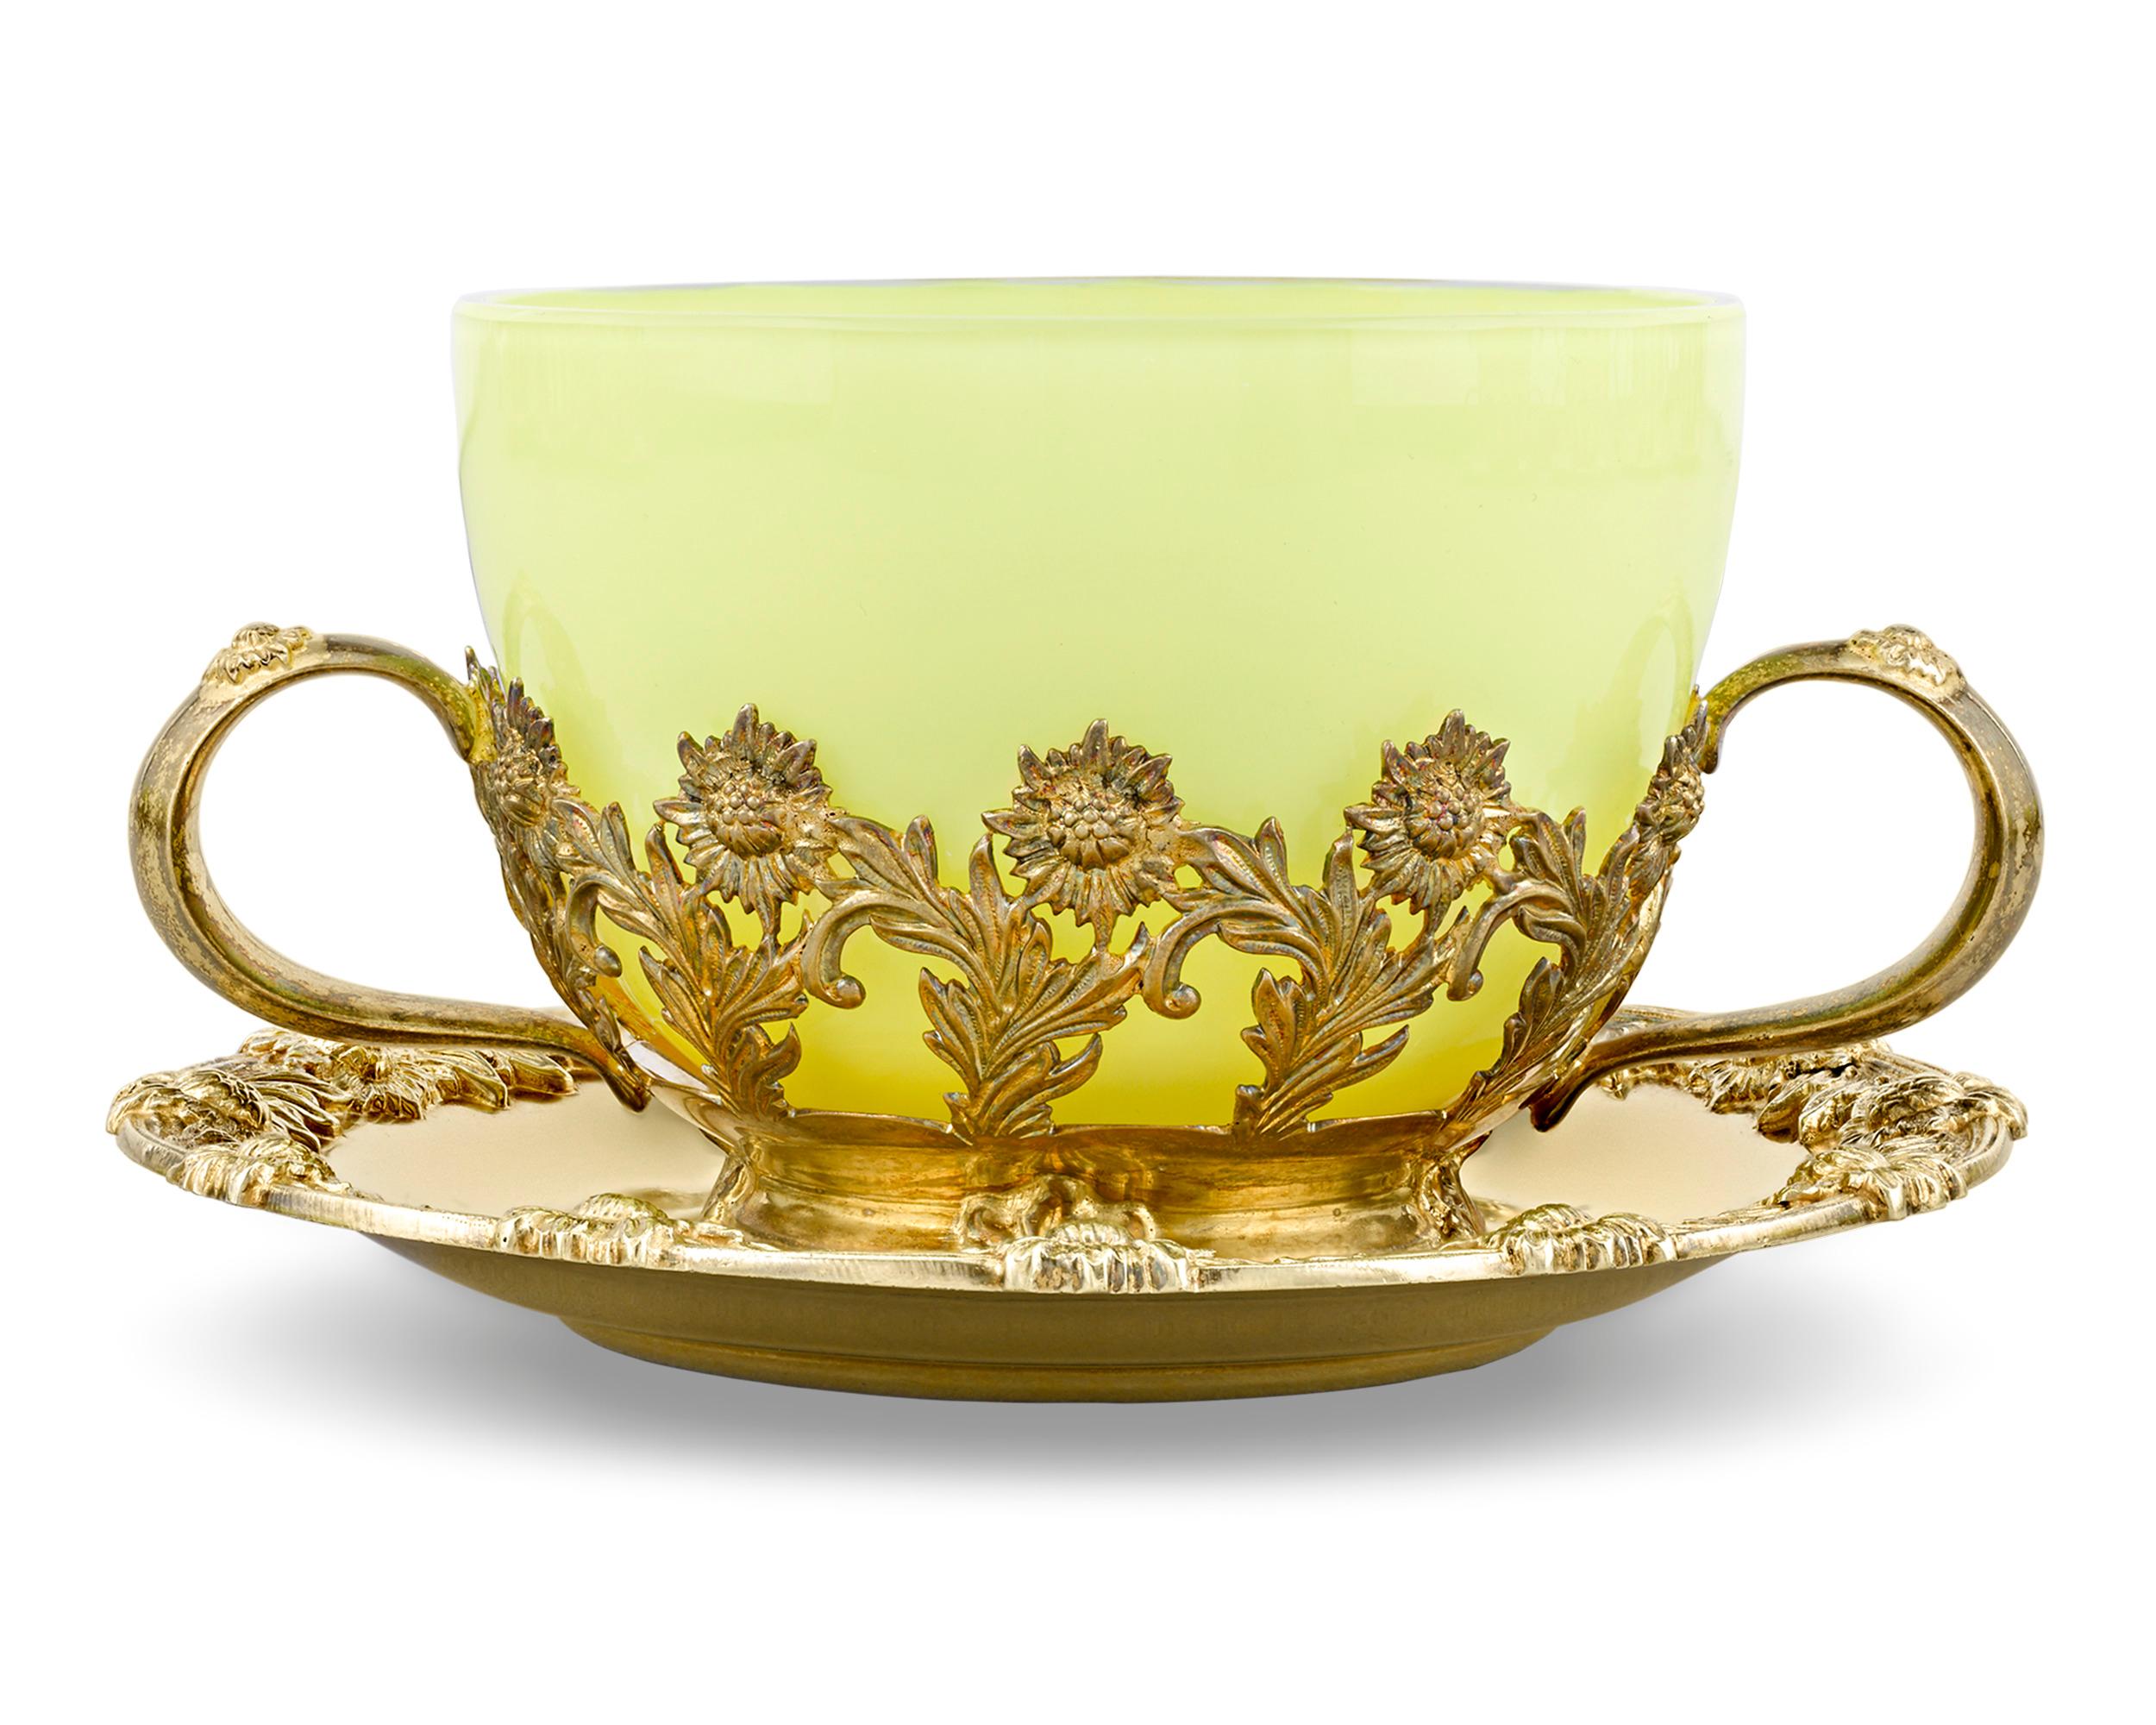 Tiffany & Co.’s beloved Chrysanthemum pattern is showcased in this rare and exceptional teacup service created for royalty. Bearing the coronet of a European baron, this set contains eight each of silver-gilt cups and saucers along with eight